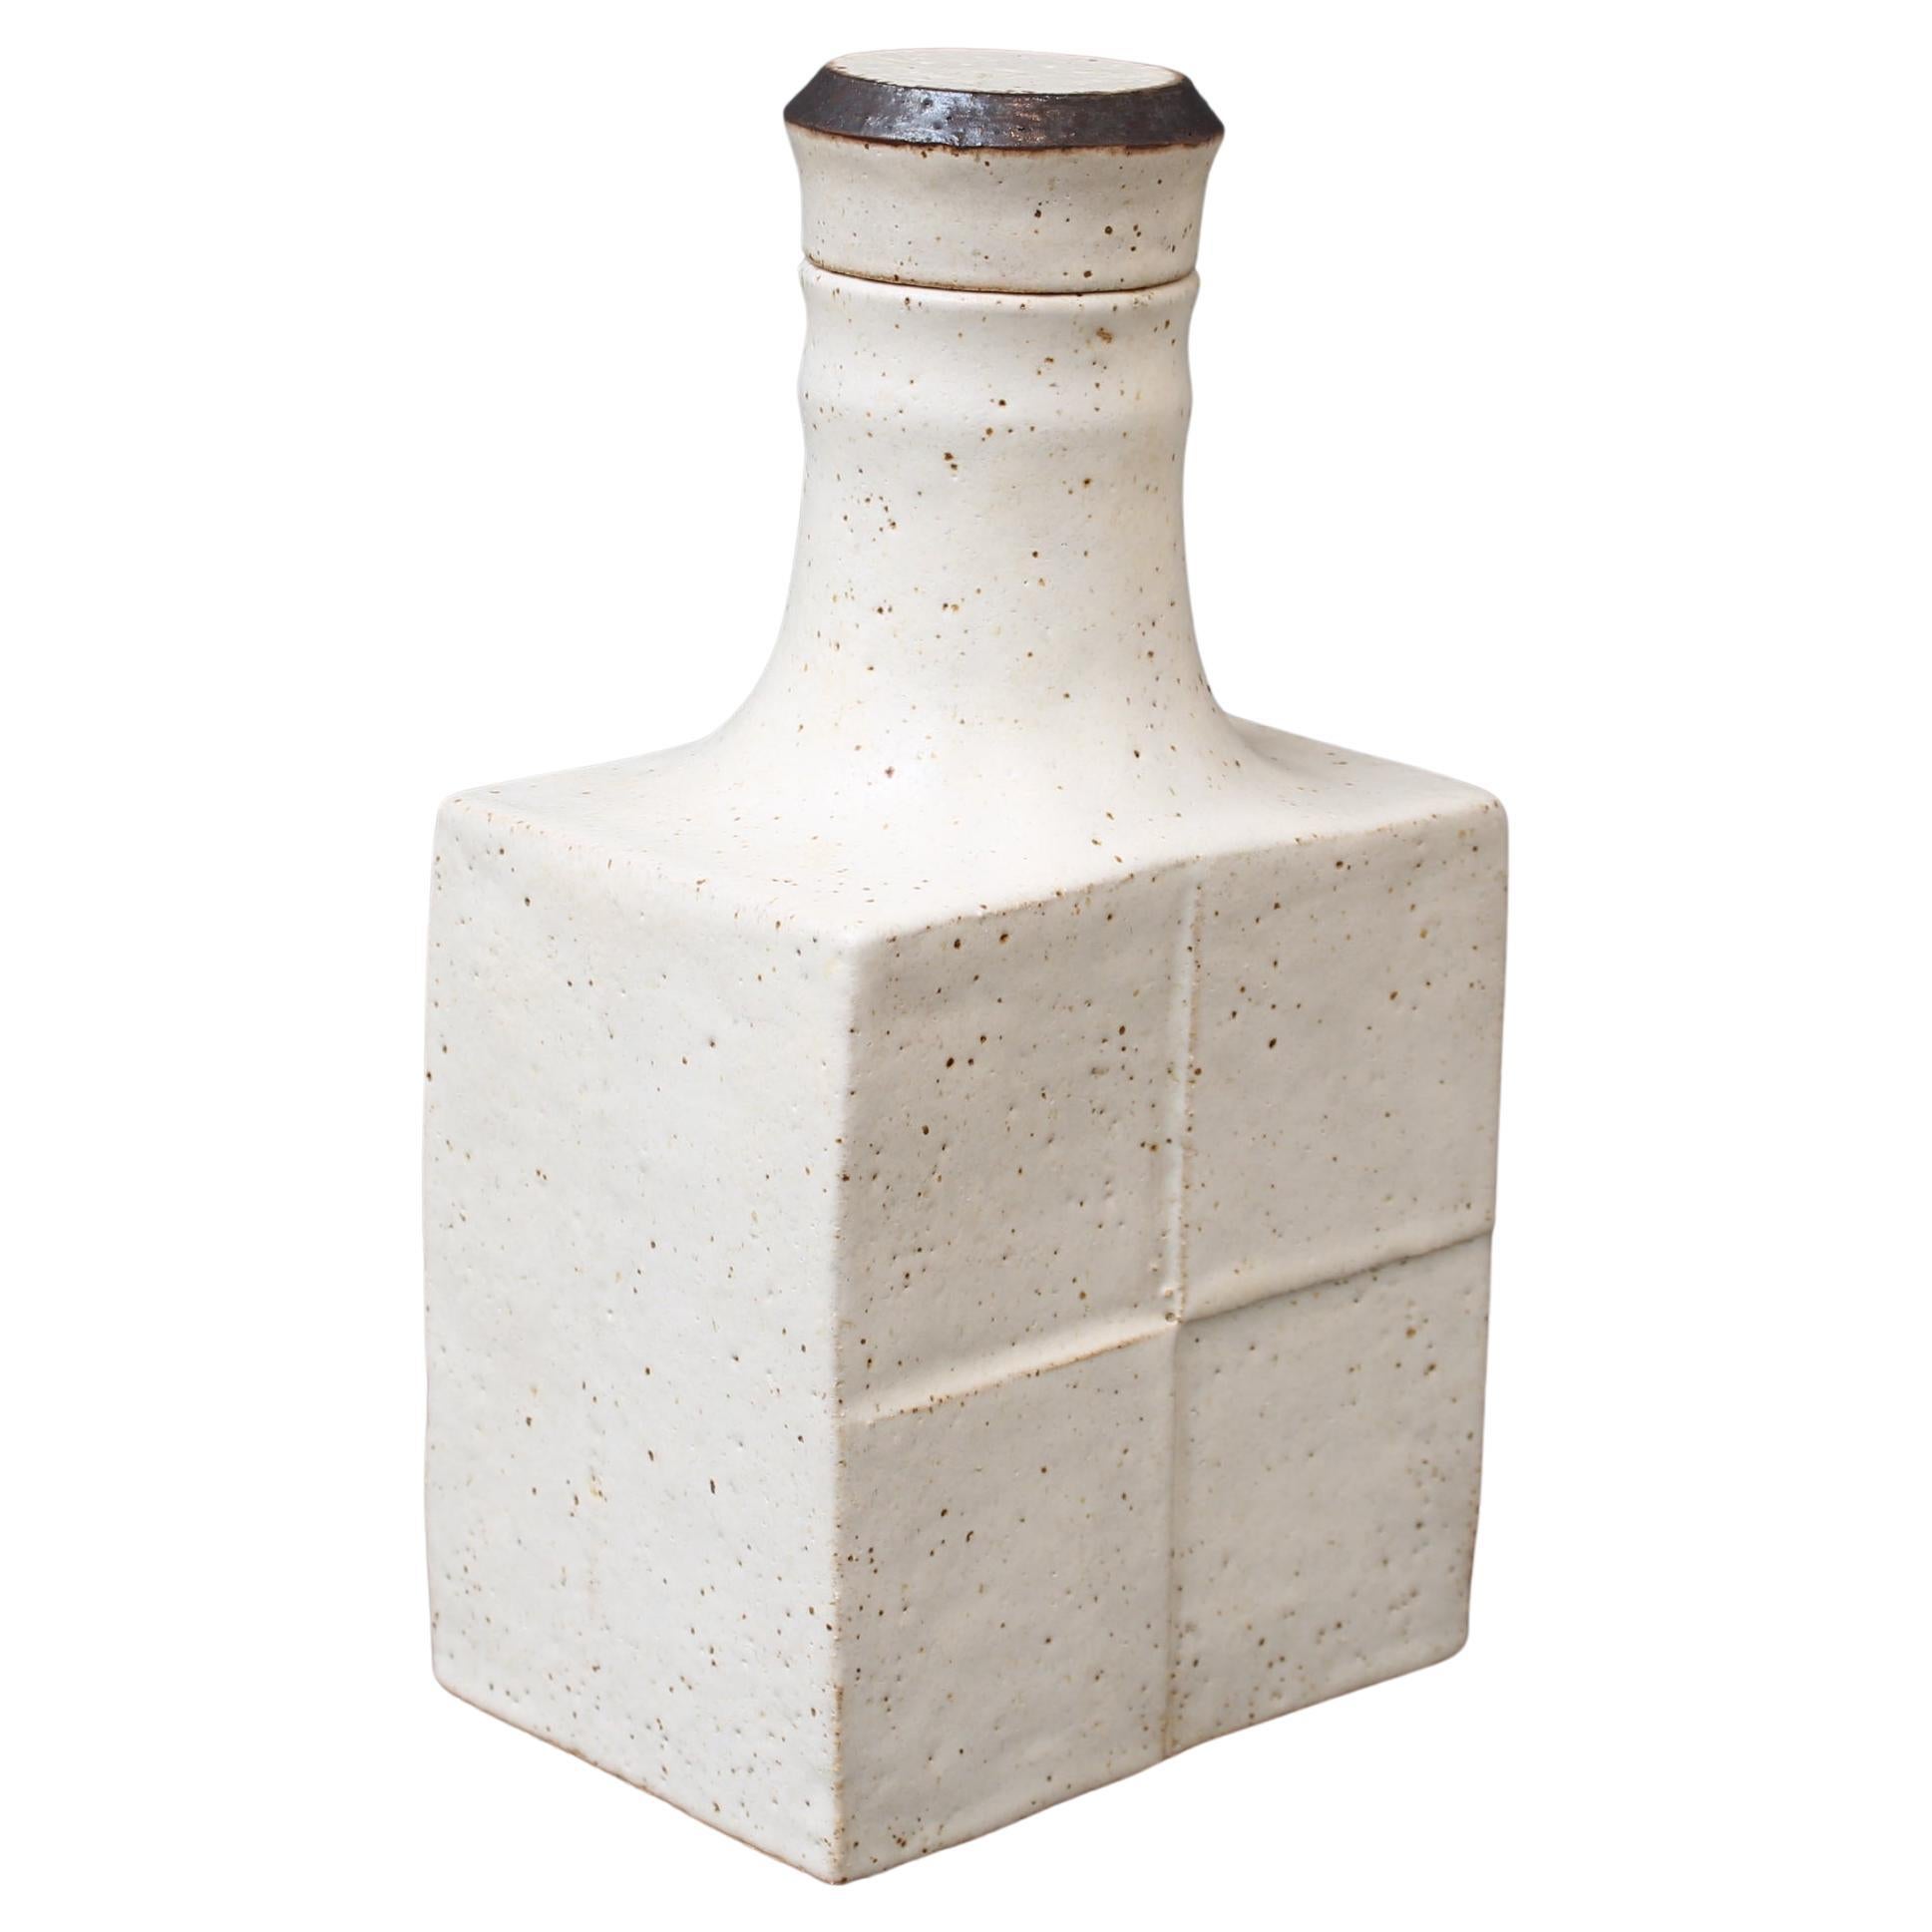 Italian ceramic decorative bottle with lid by Bruno Gambone (circa 1980s). Reduced to its most basic elements - like a Mondrian painting - Gambone has simplified this stately piece to essential straight lines in the base and pure, soft lines in the